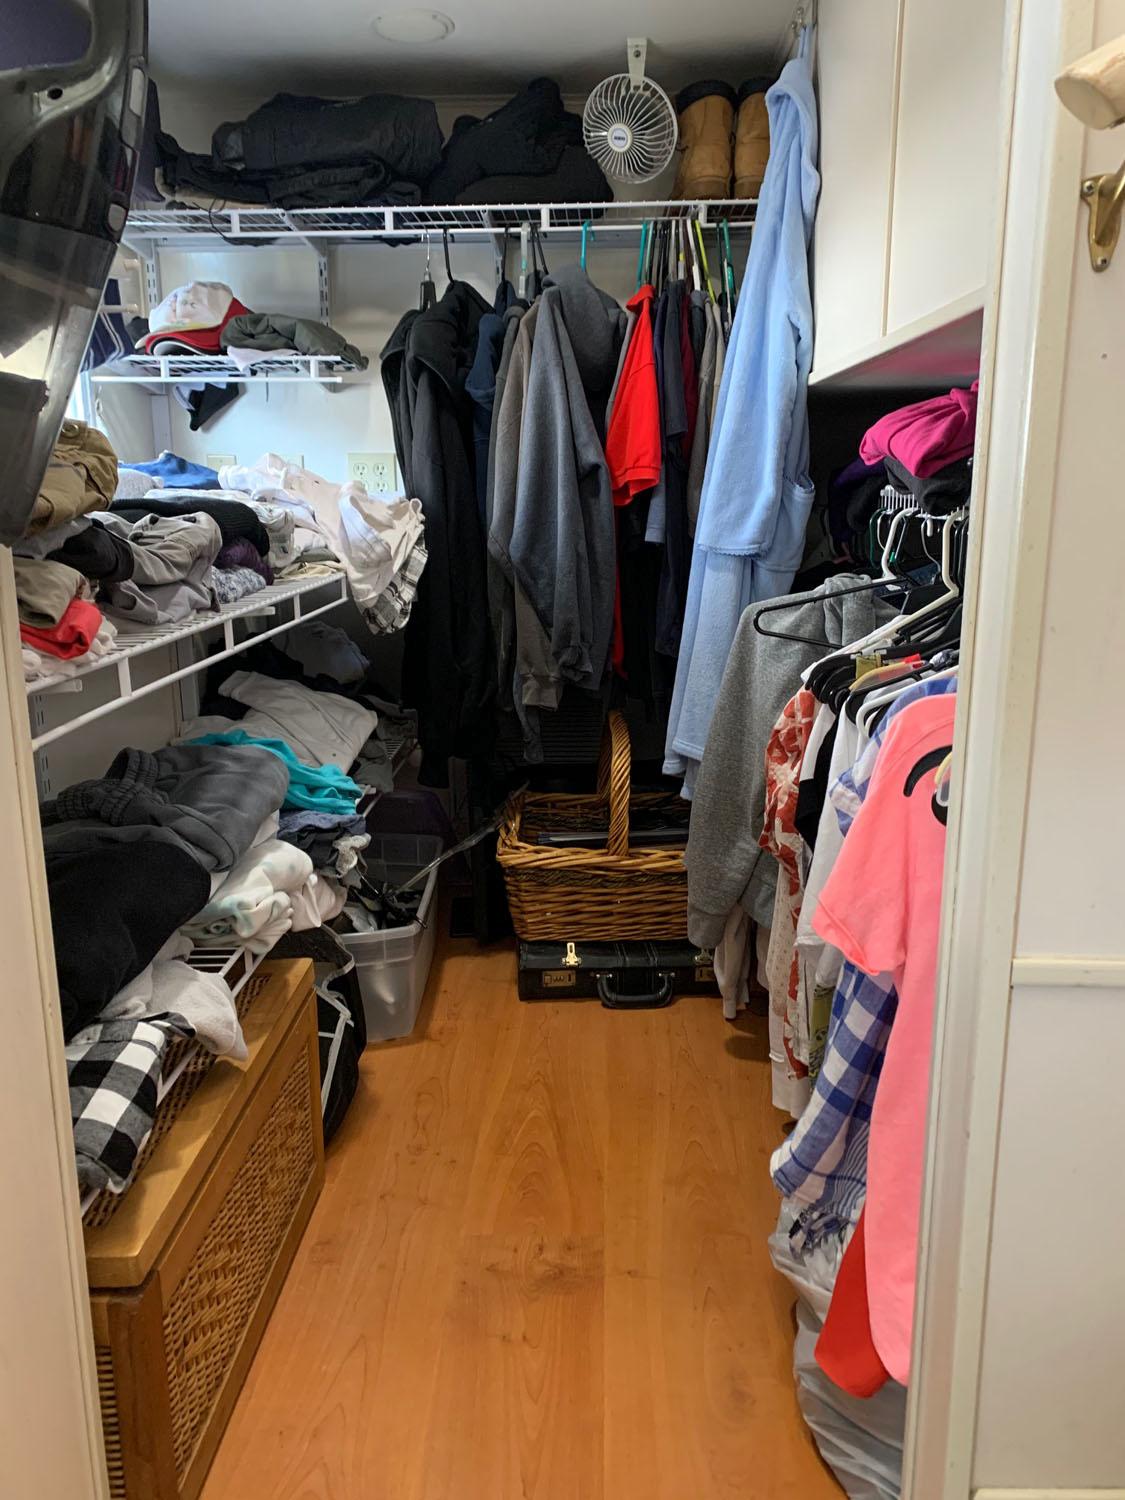 Sizeable Area Forward (Currently Used as Walk-In Closet)